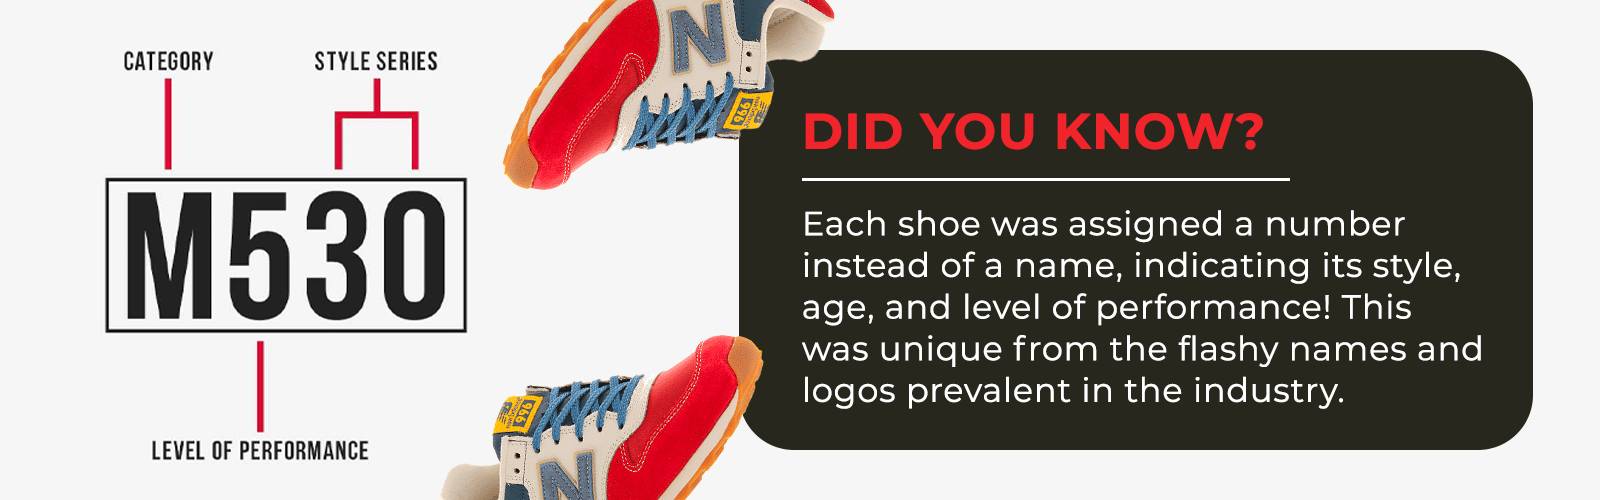 Did you know fact on New Balance